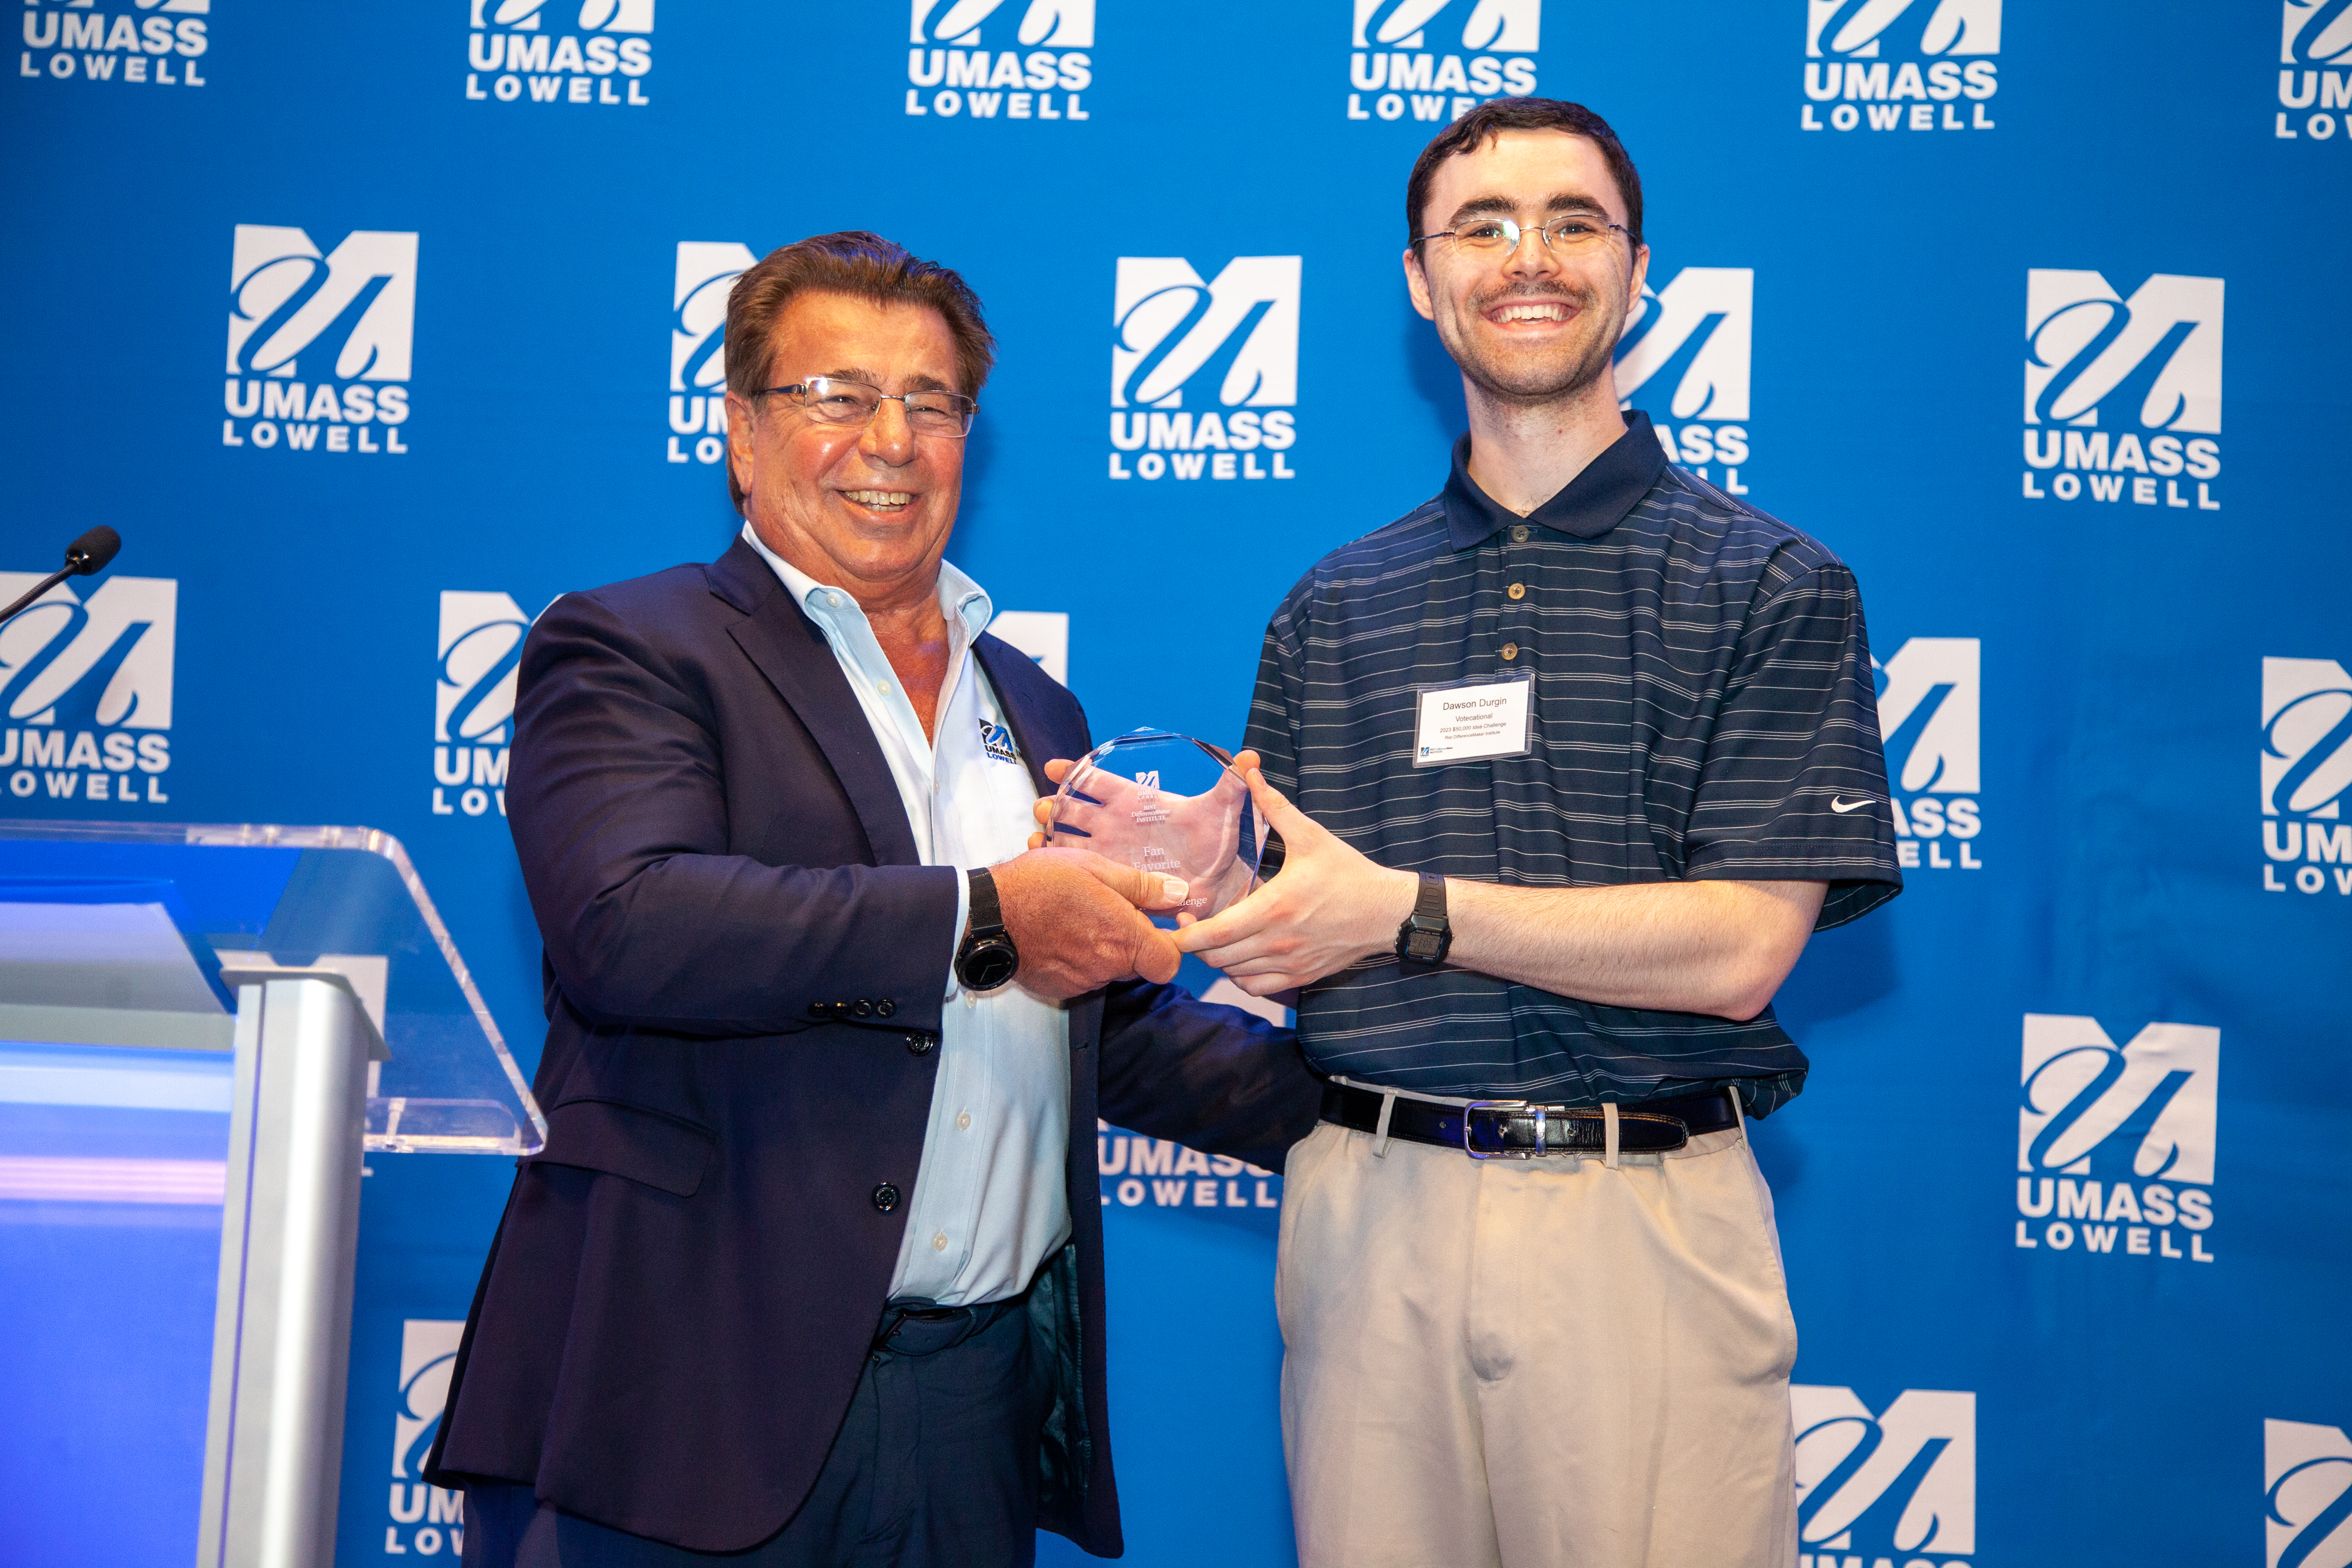 Brian Rist and Dawson Durgin, team leader for Votecational smiling and holding the Fan Favorite award in front of a UMass Lowell blue background.